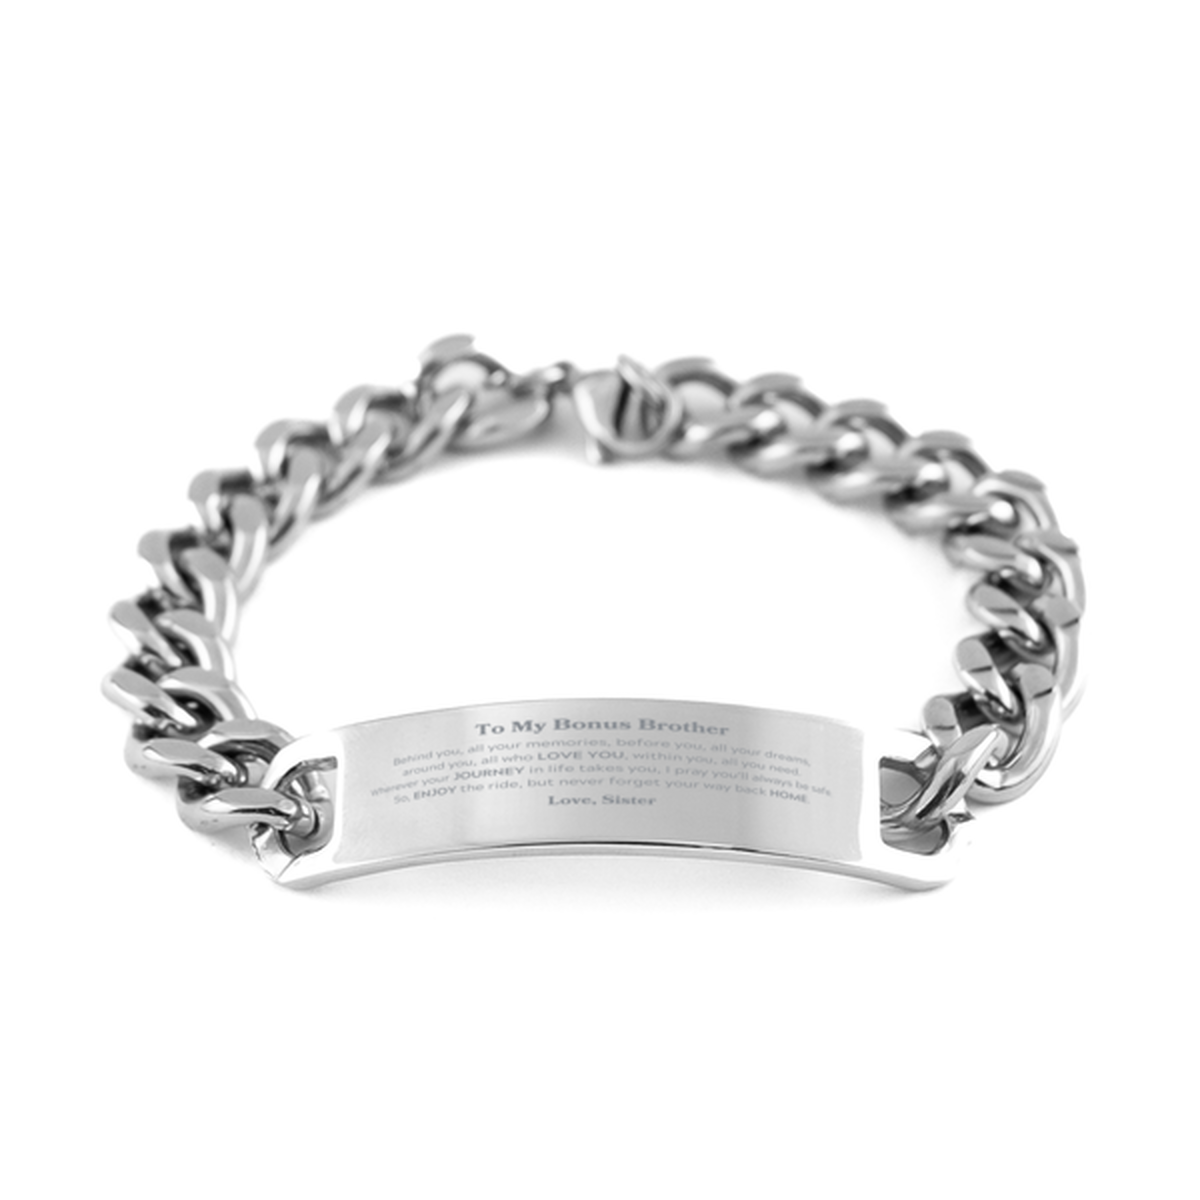 To My Bonus Brother Graduation Gifts from Sister, Bonus Brother Cuban Chain Stainless Steel Bracelet Christmas Birthday Gifts for Bonus Brother Behind you, all your memories, before you, all your dreams. Love, Sister